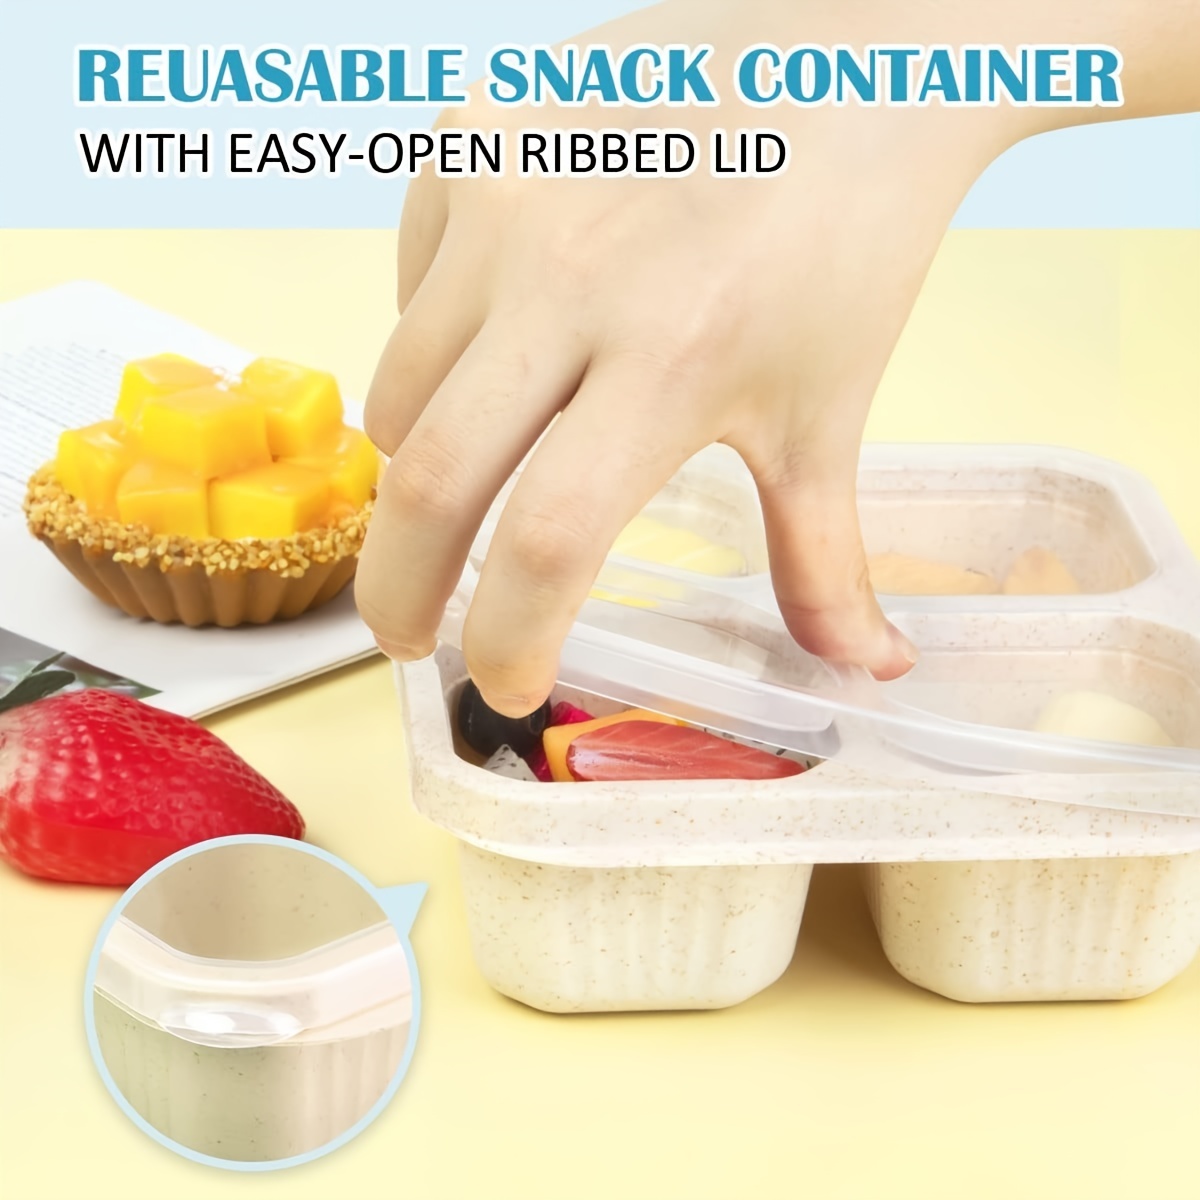 Buy Snack Containers, 4 Pack Reusable Lunchable Container, 4